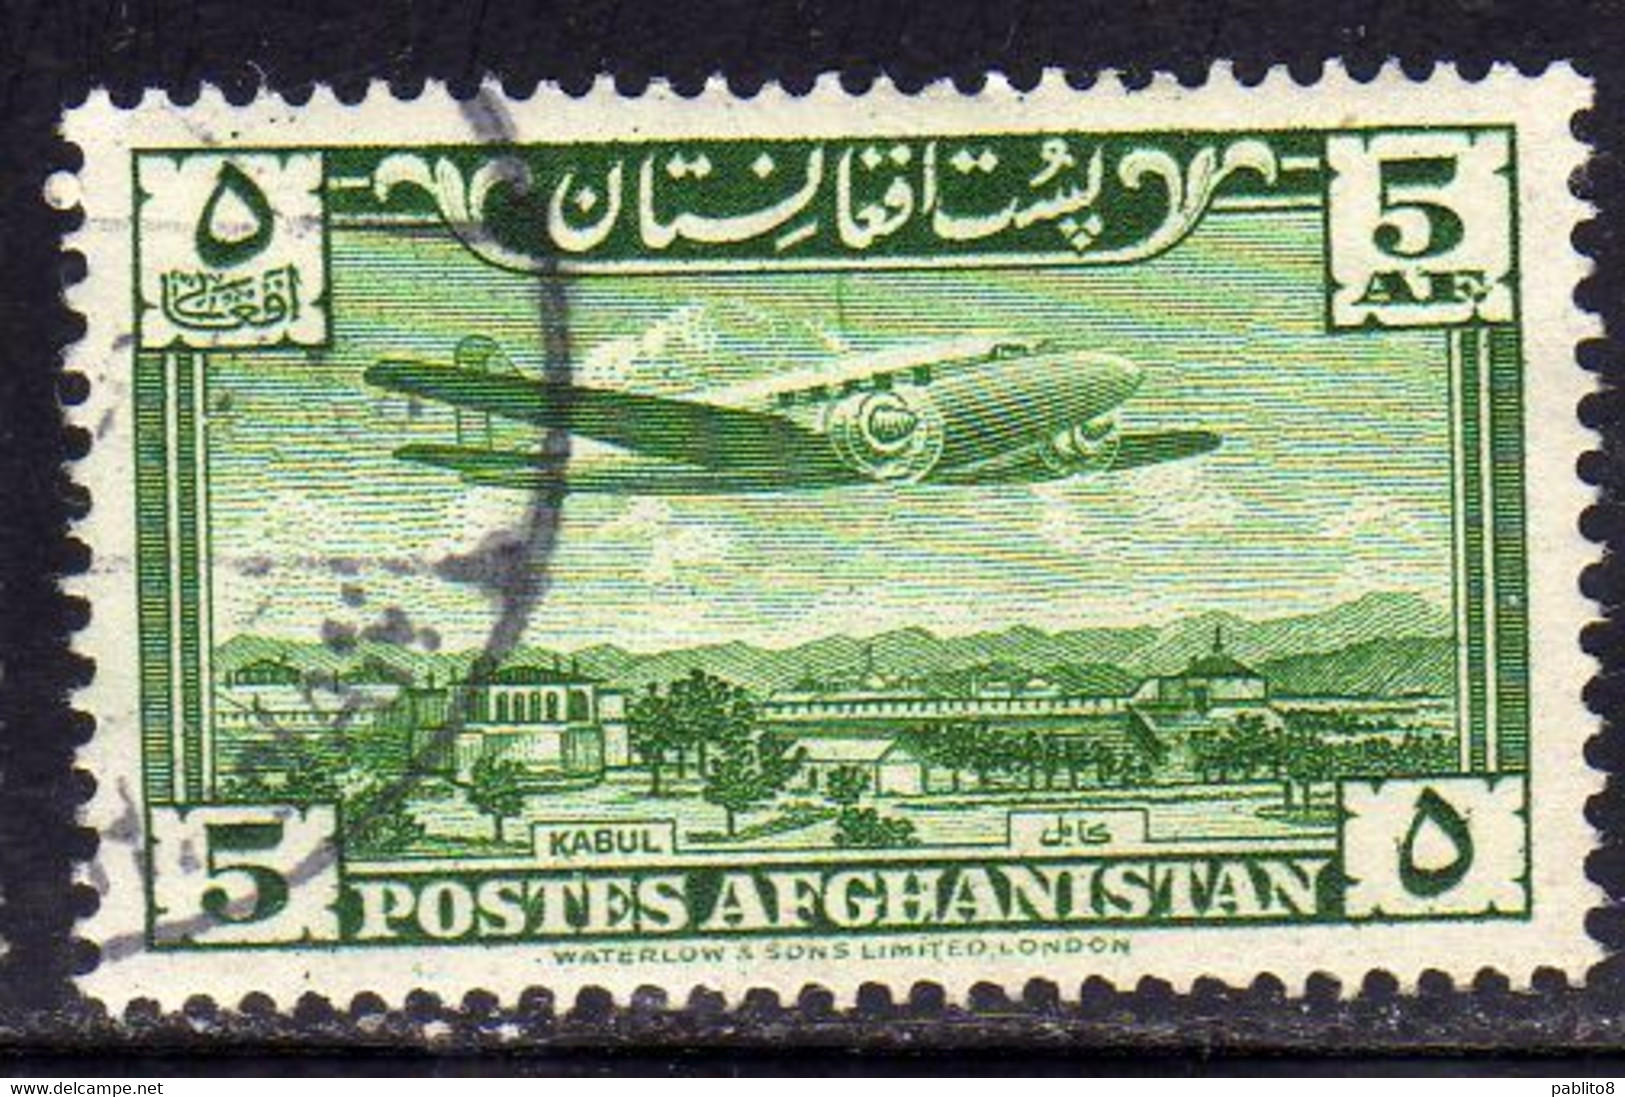 AFGHANISTAN AFGANISTAN AFGHAN POST 1951 1954 AIR POS MAIL AIRMAIL PLANE OVER PALACE GROUNDS KABUL 5af USED USATO OBLITER - Afghanistan